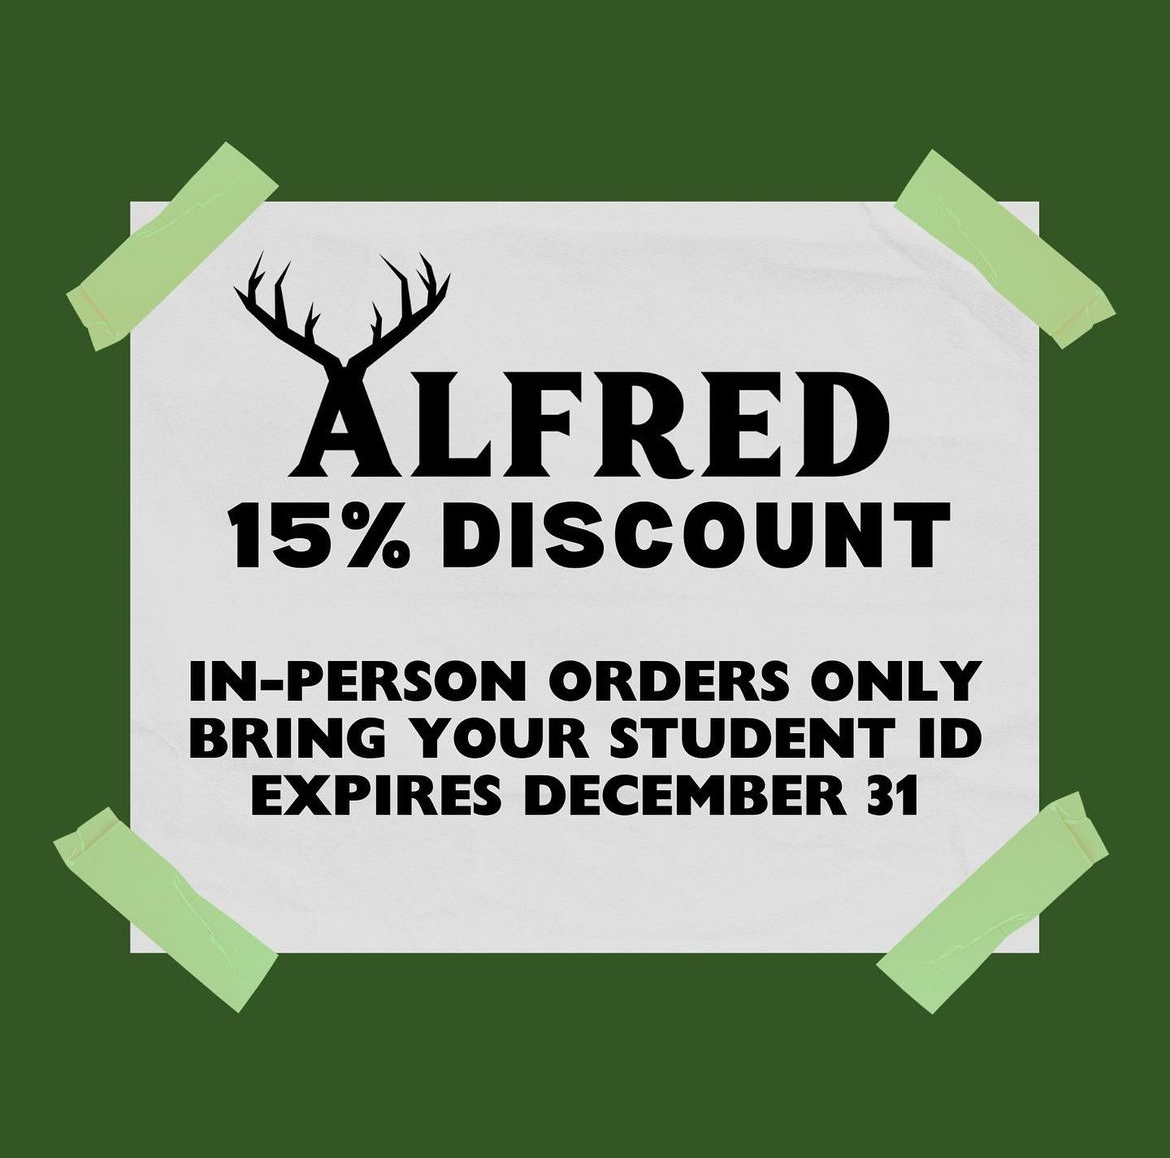 Prefect Council announced the Alfred Coffee student discount in an email to upper school students. 